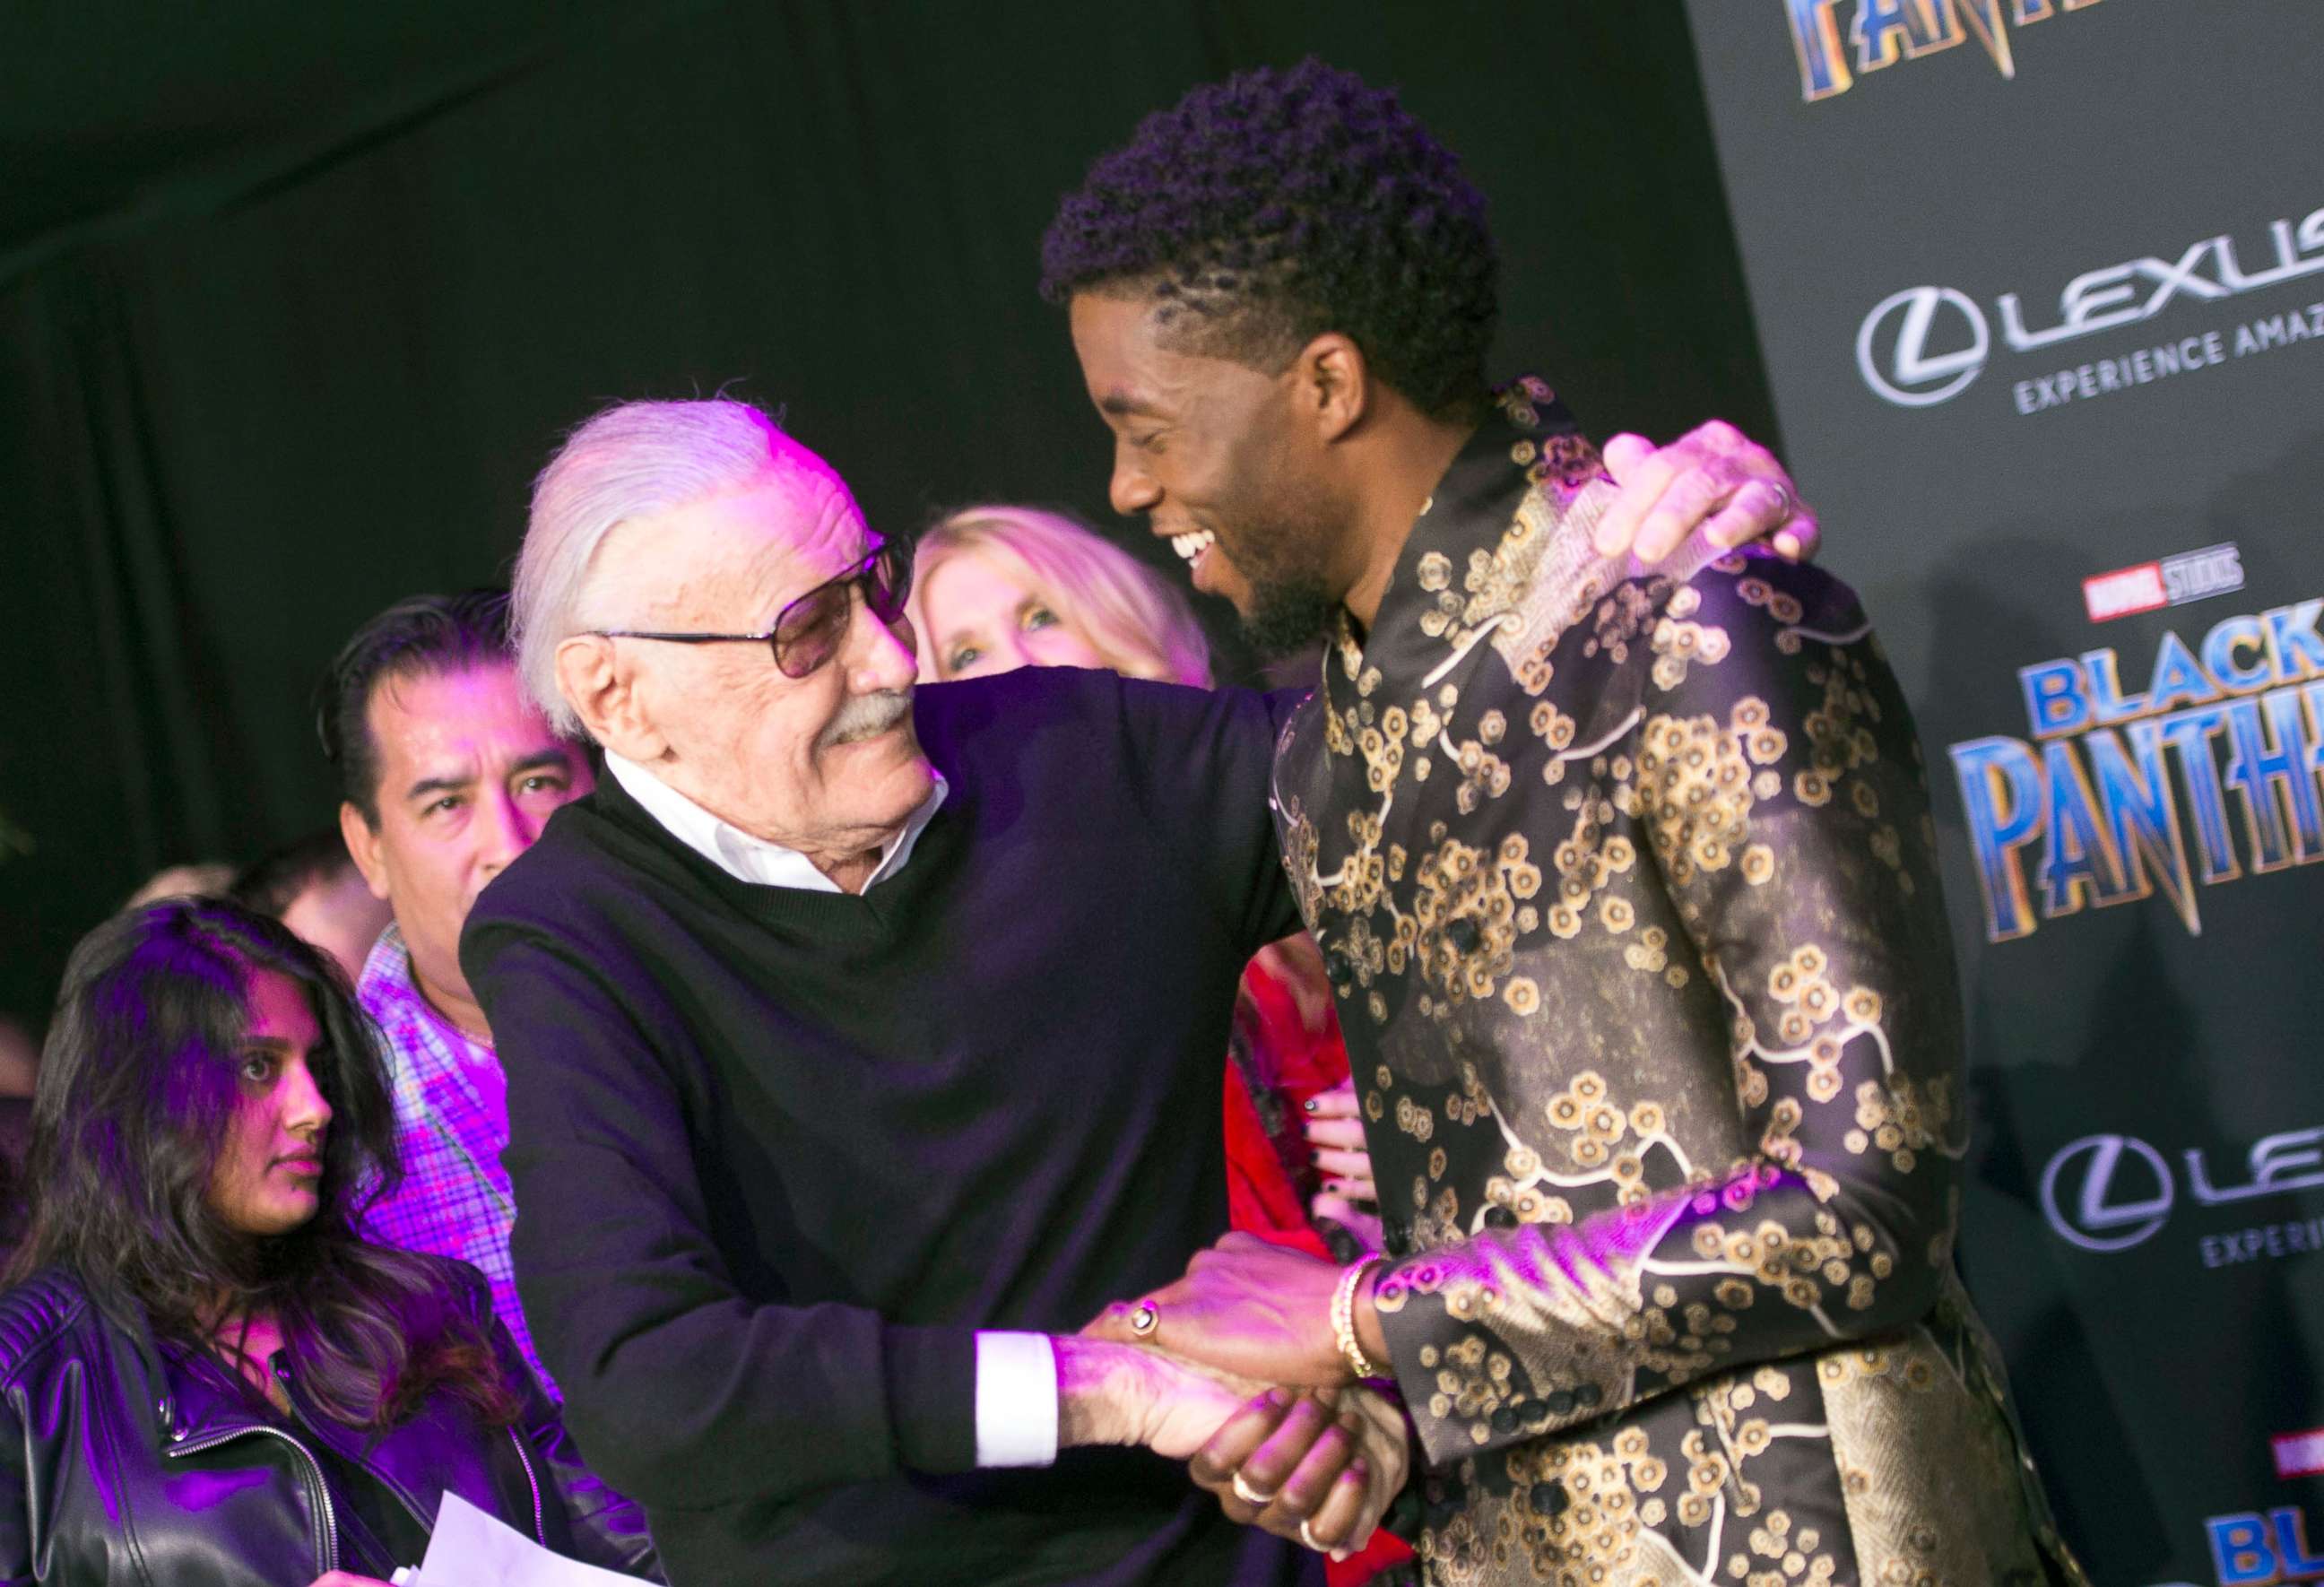 PHOTO: Comic book writer Stan Lee and actor Chadwick Boseman attend the world premiere of Marvel Studios' Black Panther, Jan. 29, 2018, in Hollywood, Calif.